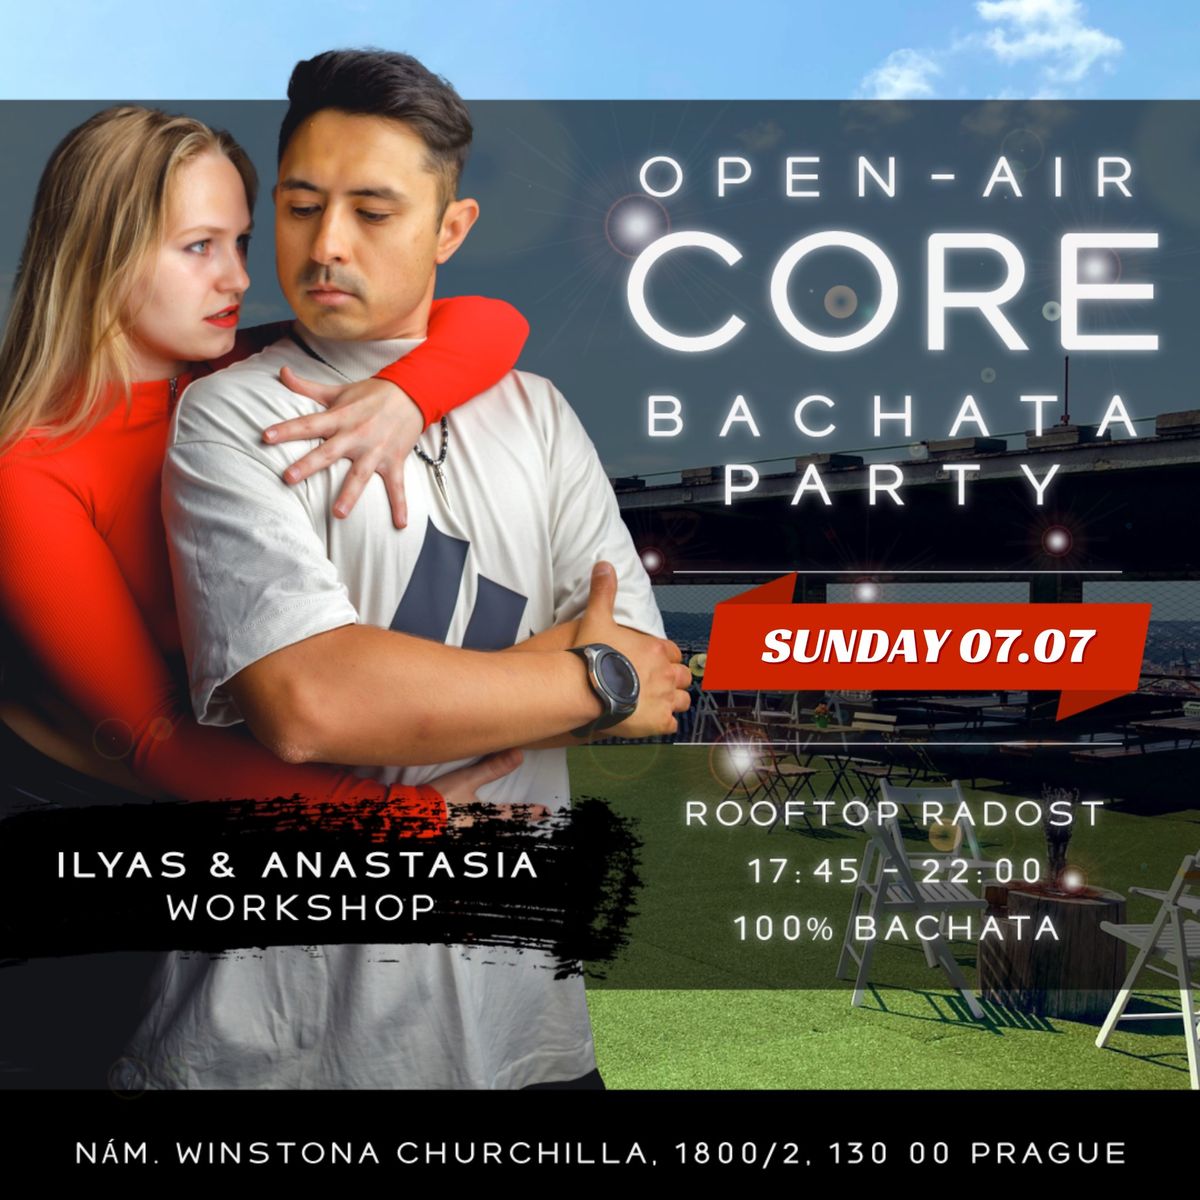 OPEN-AIR CORE BACHATA PARTY | Rooftop Radost